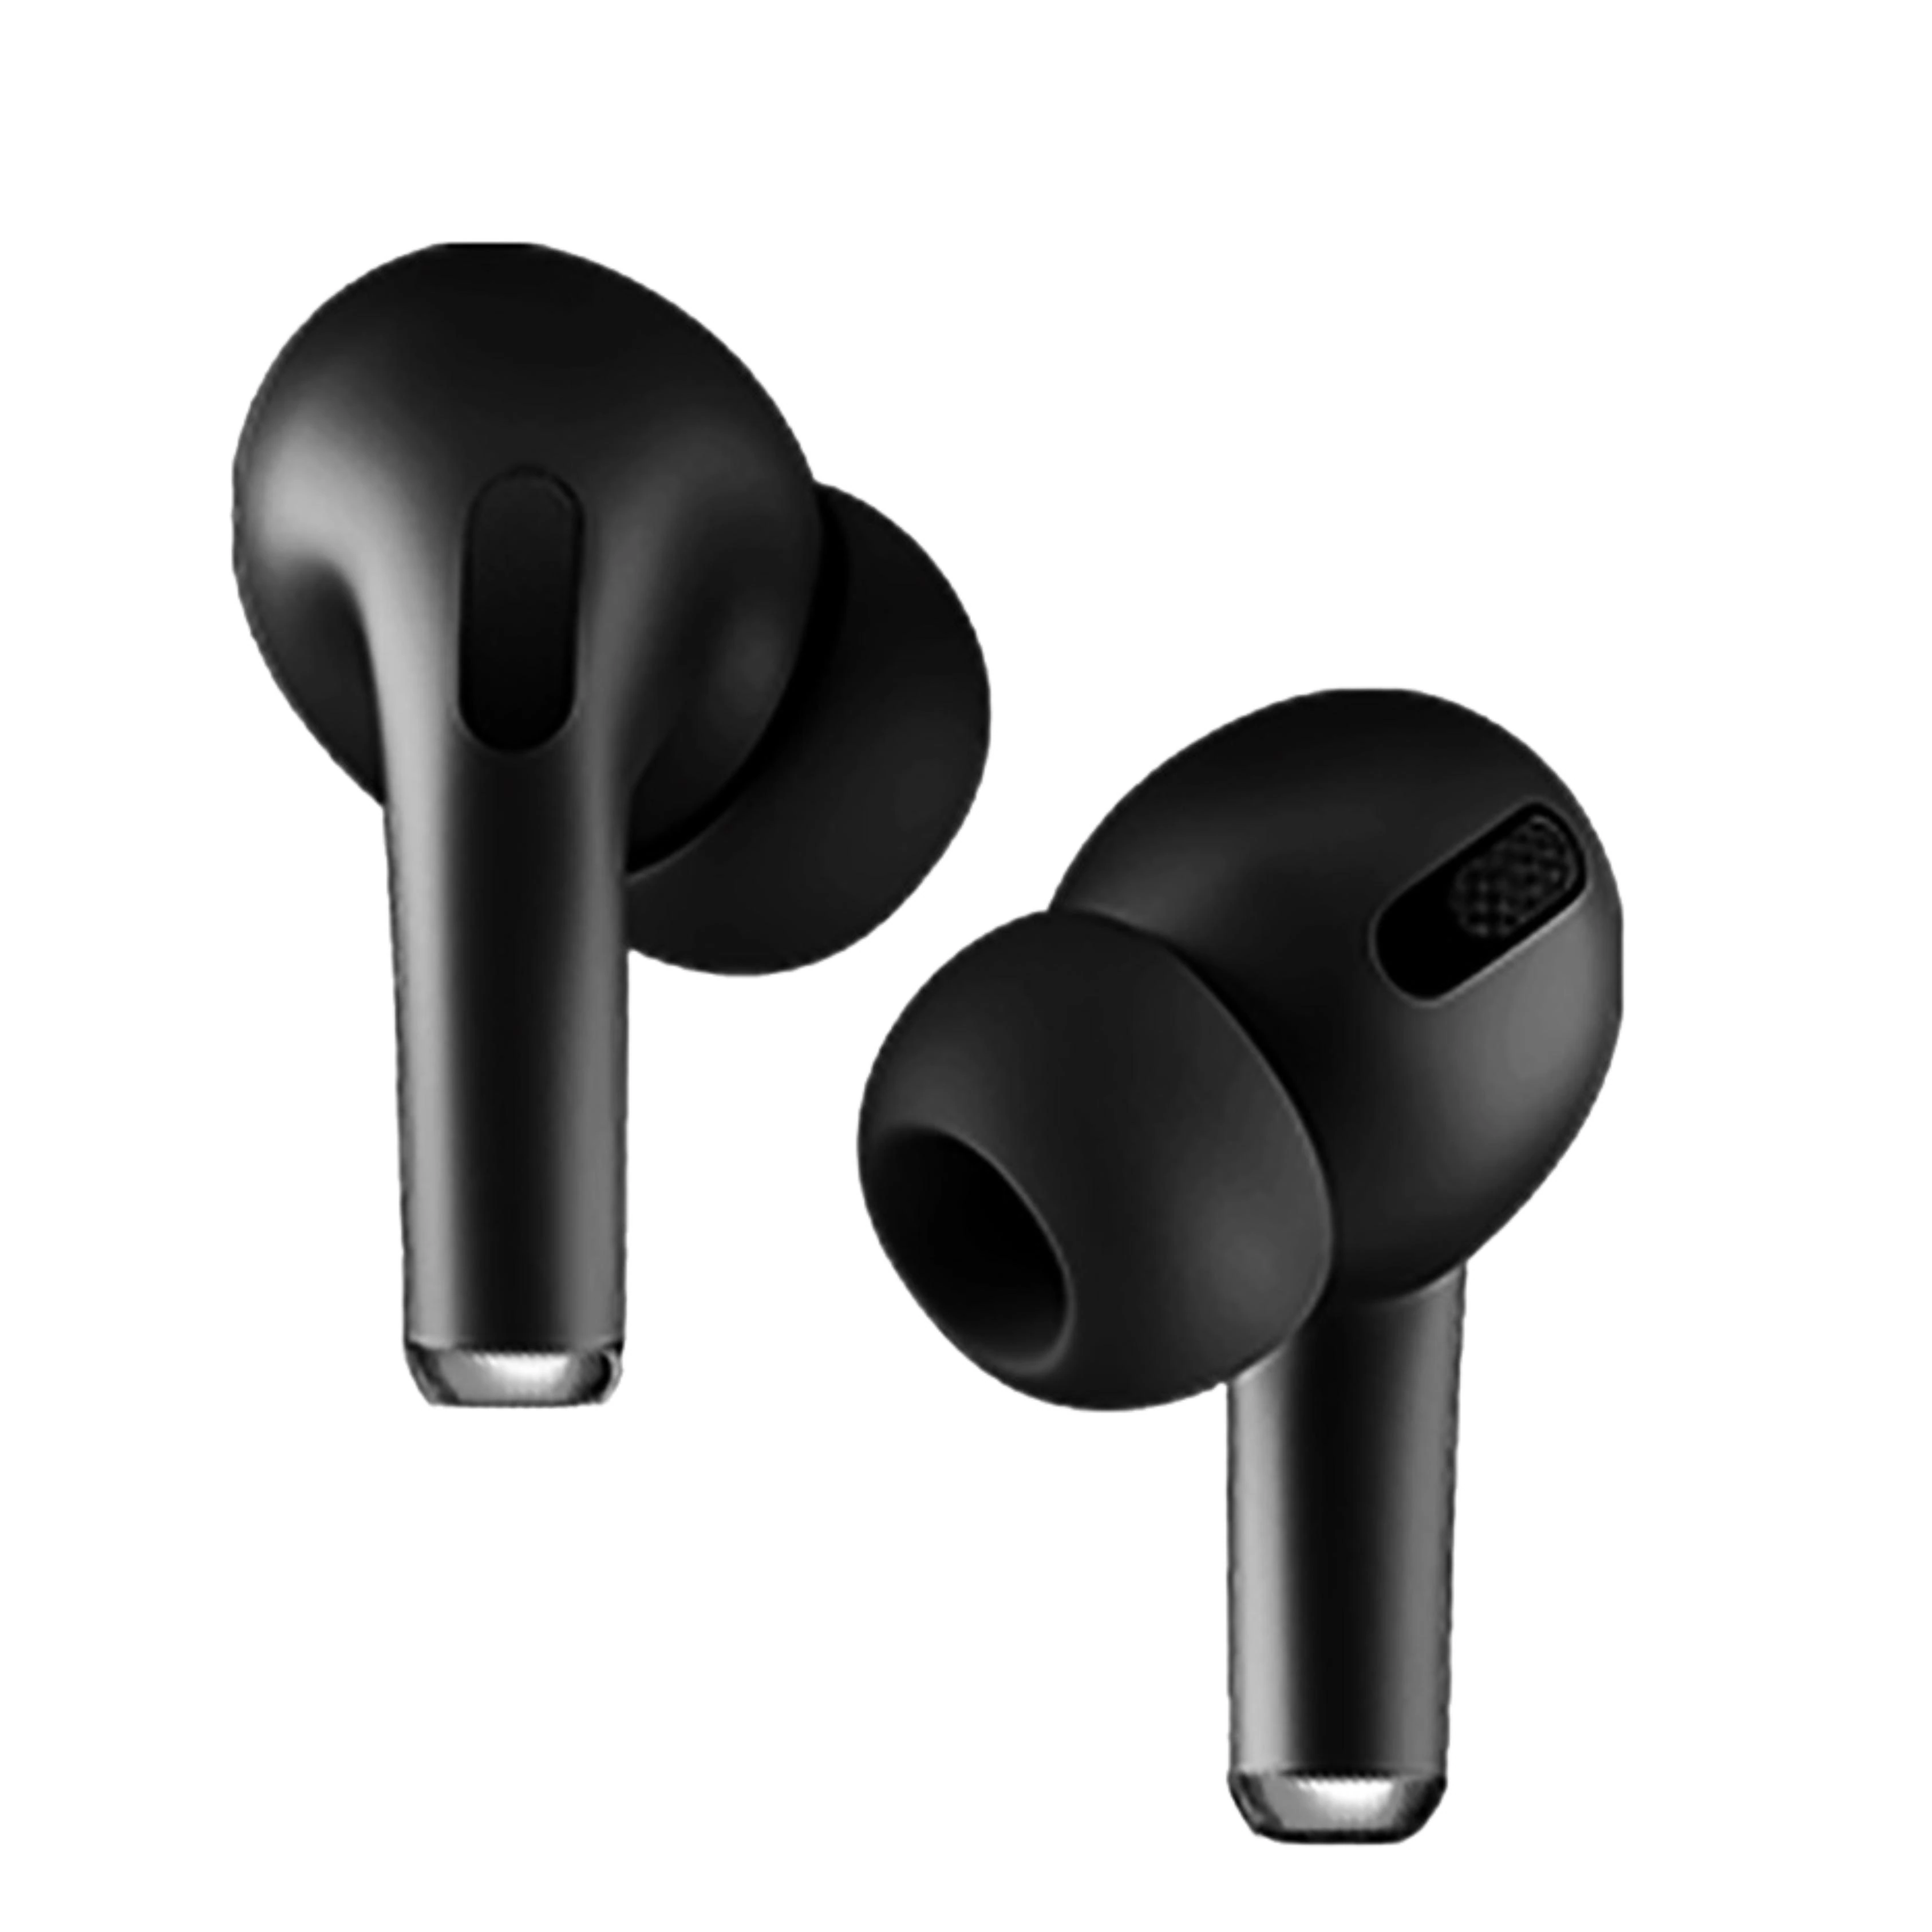 KARIMOTECH AIR_ PODS PRO True Bluetooth Headset with Fast Charging Cable,  Touch Control, Wireless Earbuds Stereo Sound & Noise Cancellation (Black, 